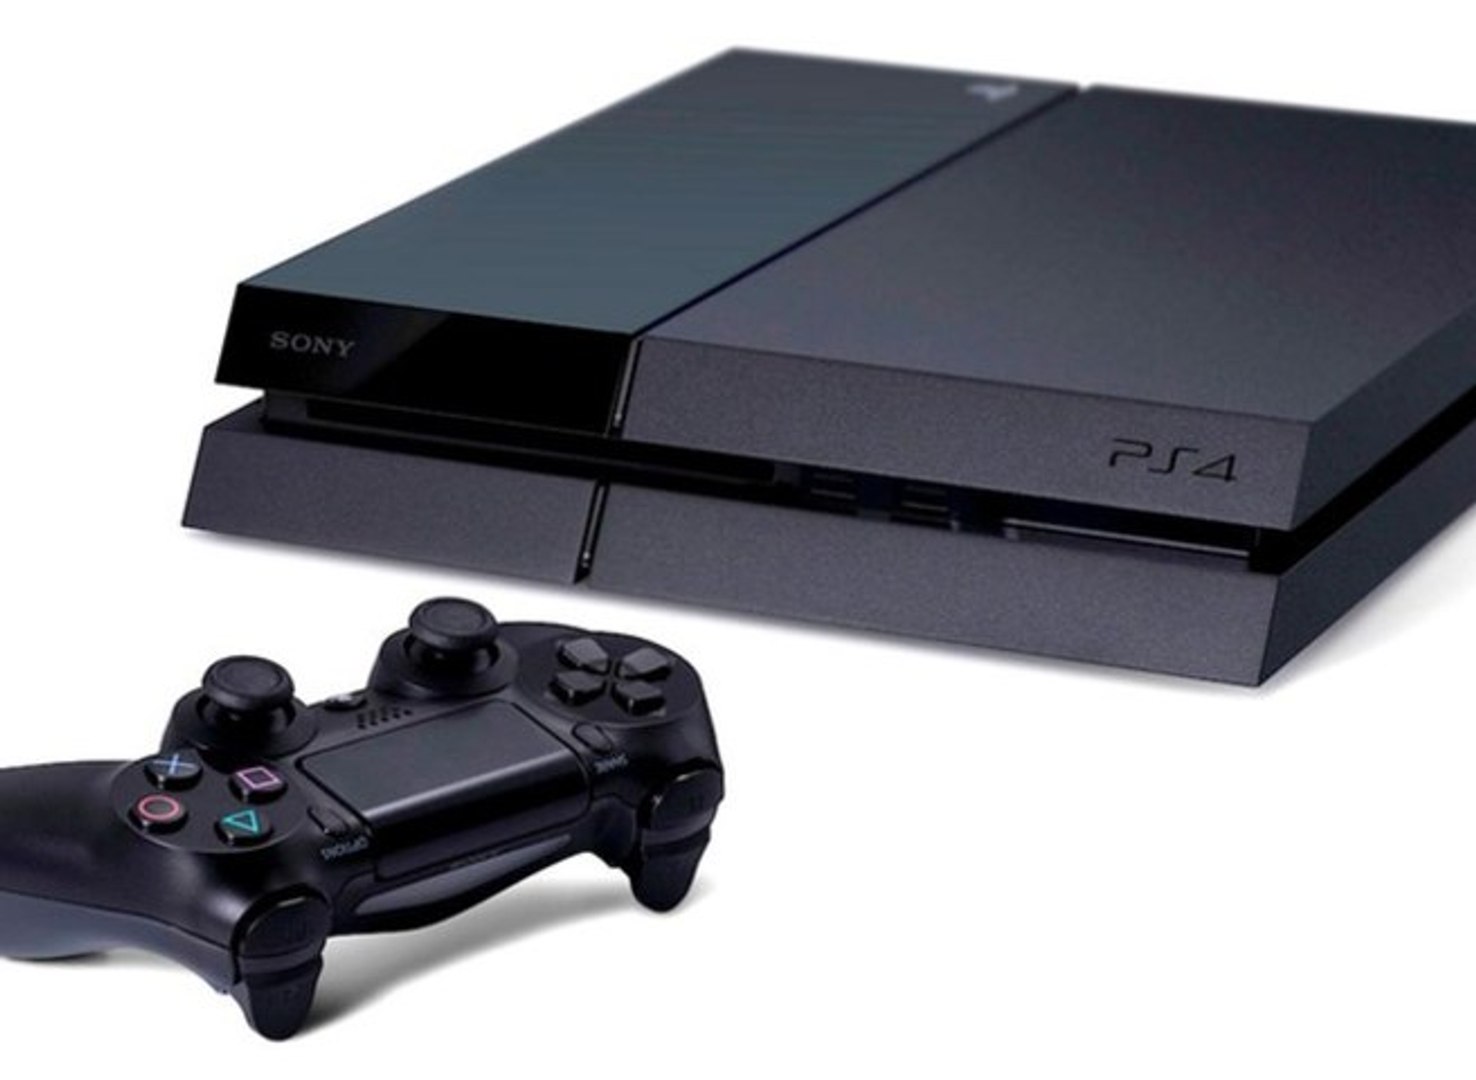 The Official PS4 Unboxing Video - video Dailymotion